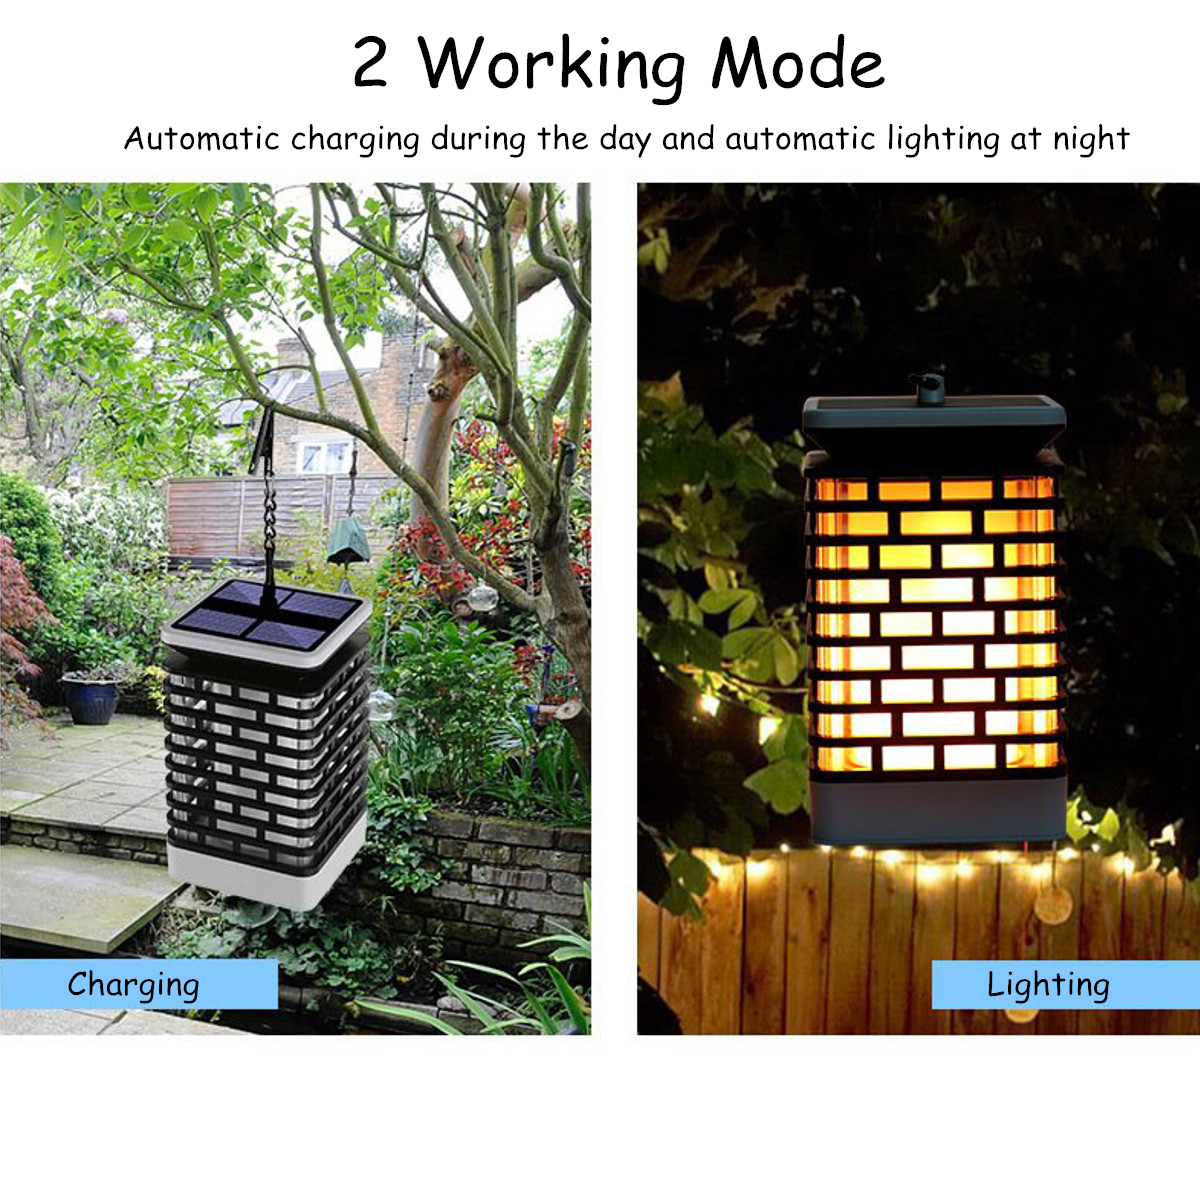 LED-Solar-Hanging-Light-Flickering-Flame-Lawn-Garden-Candle-Lantern-Lamp-for-Home-Garden-Decoration-1793632-4